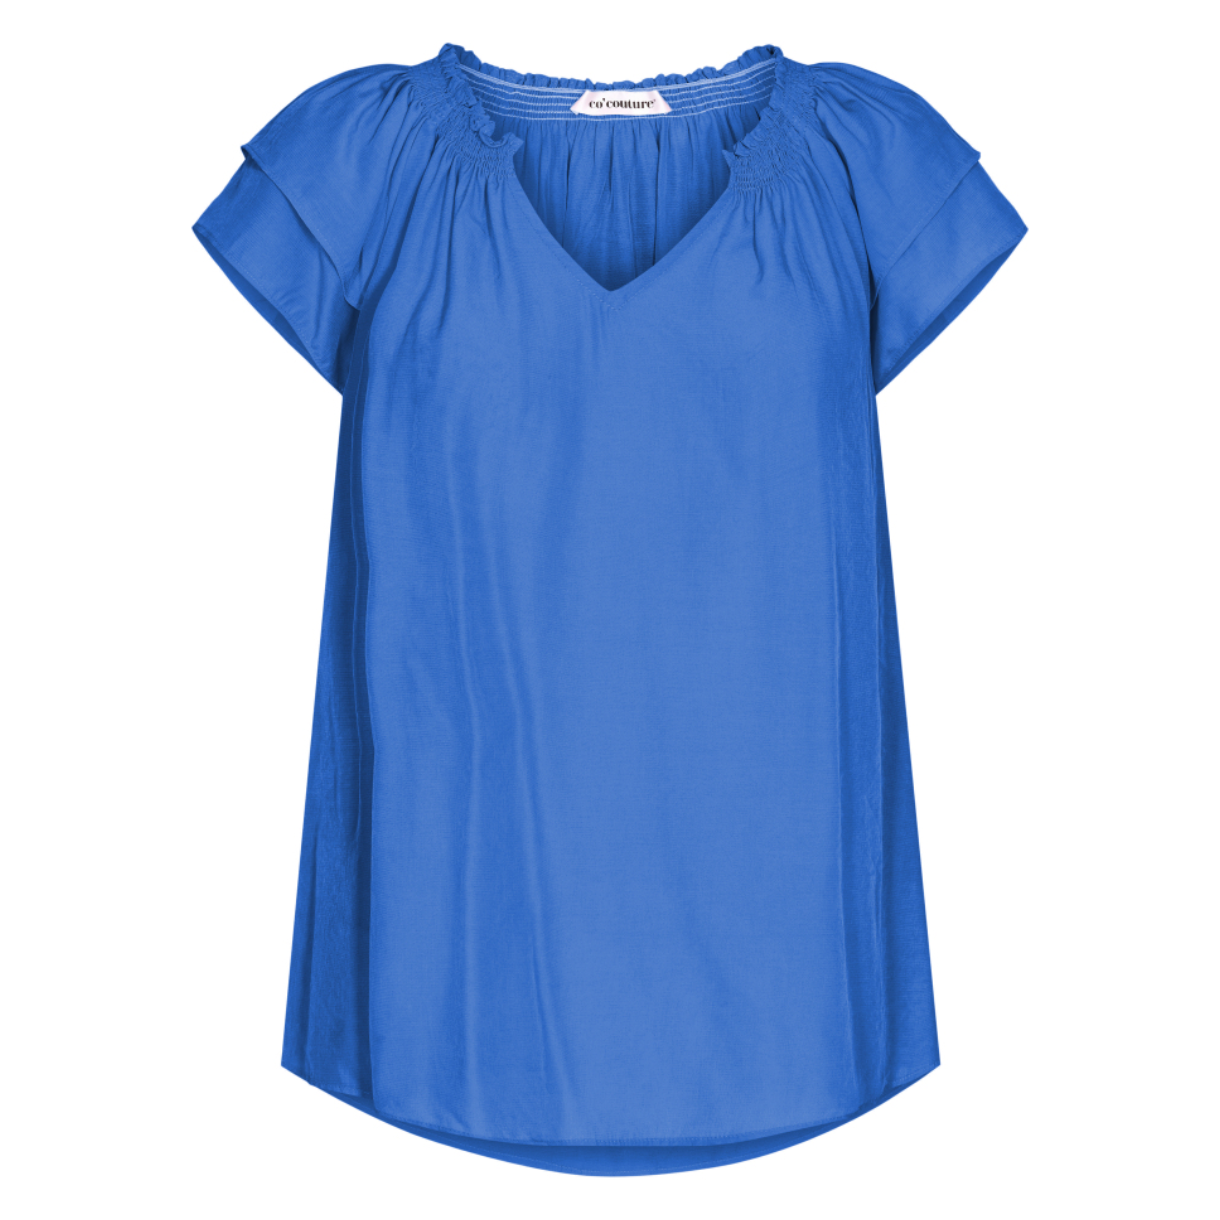 Co'couture - Sunrise Top - New Blue | Buur Ting & Tøj